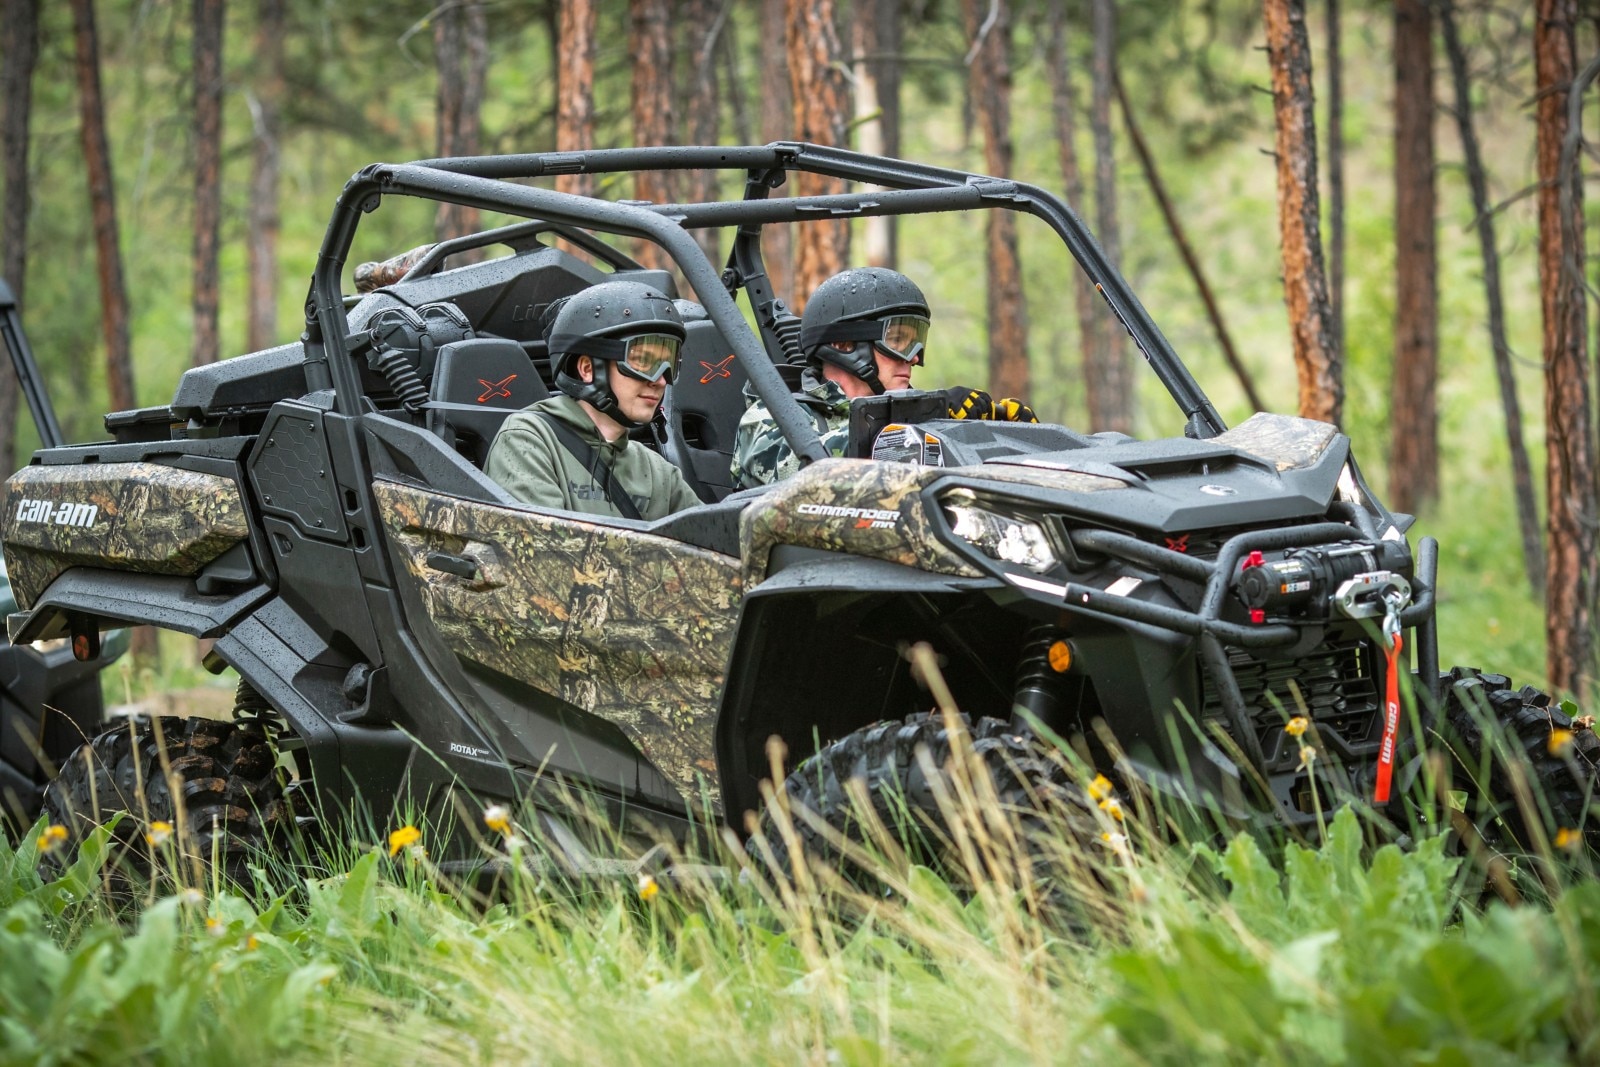 Two Can-Am riders in their Commander 1000R dressed in camo